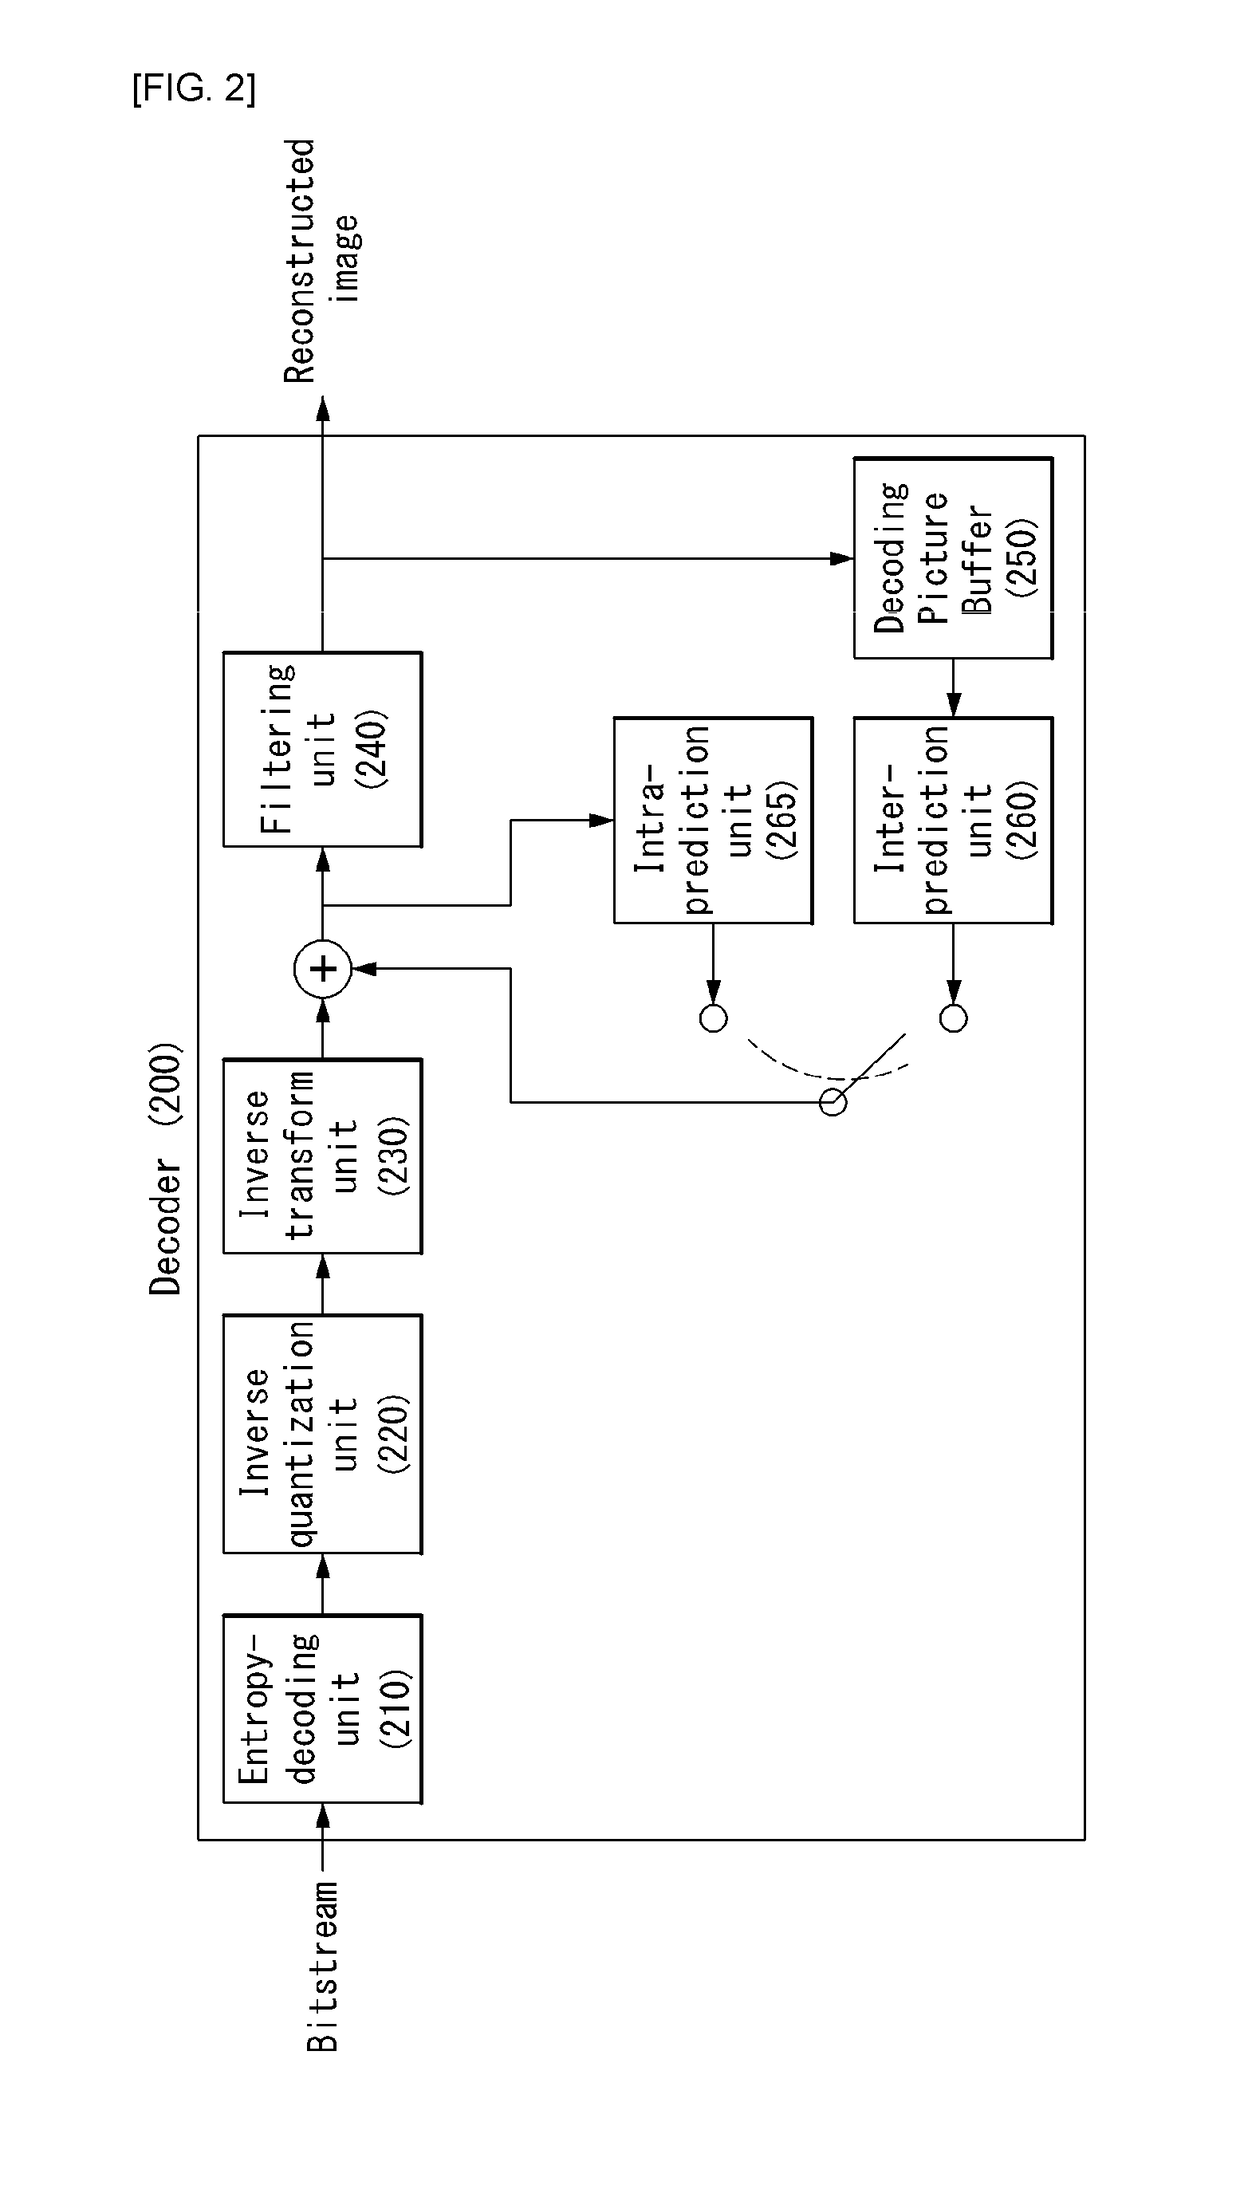 Method and apparatus for encoding/decoding a video signal